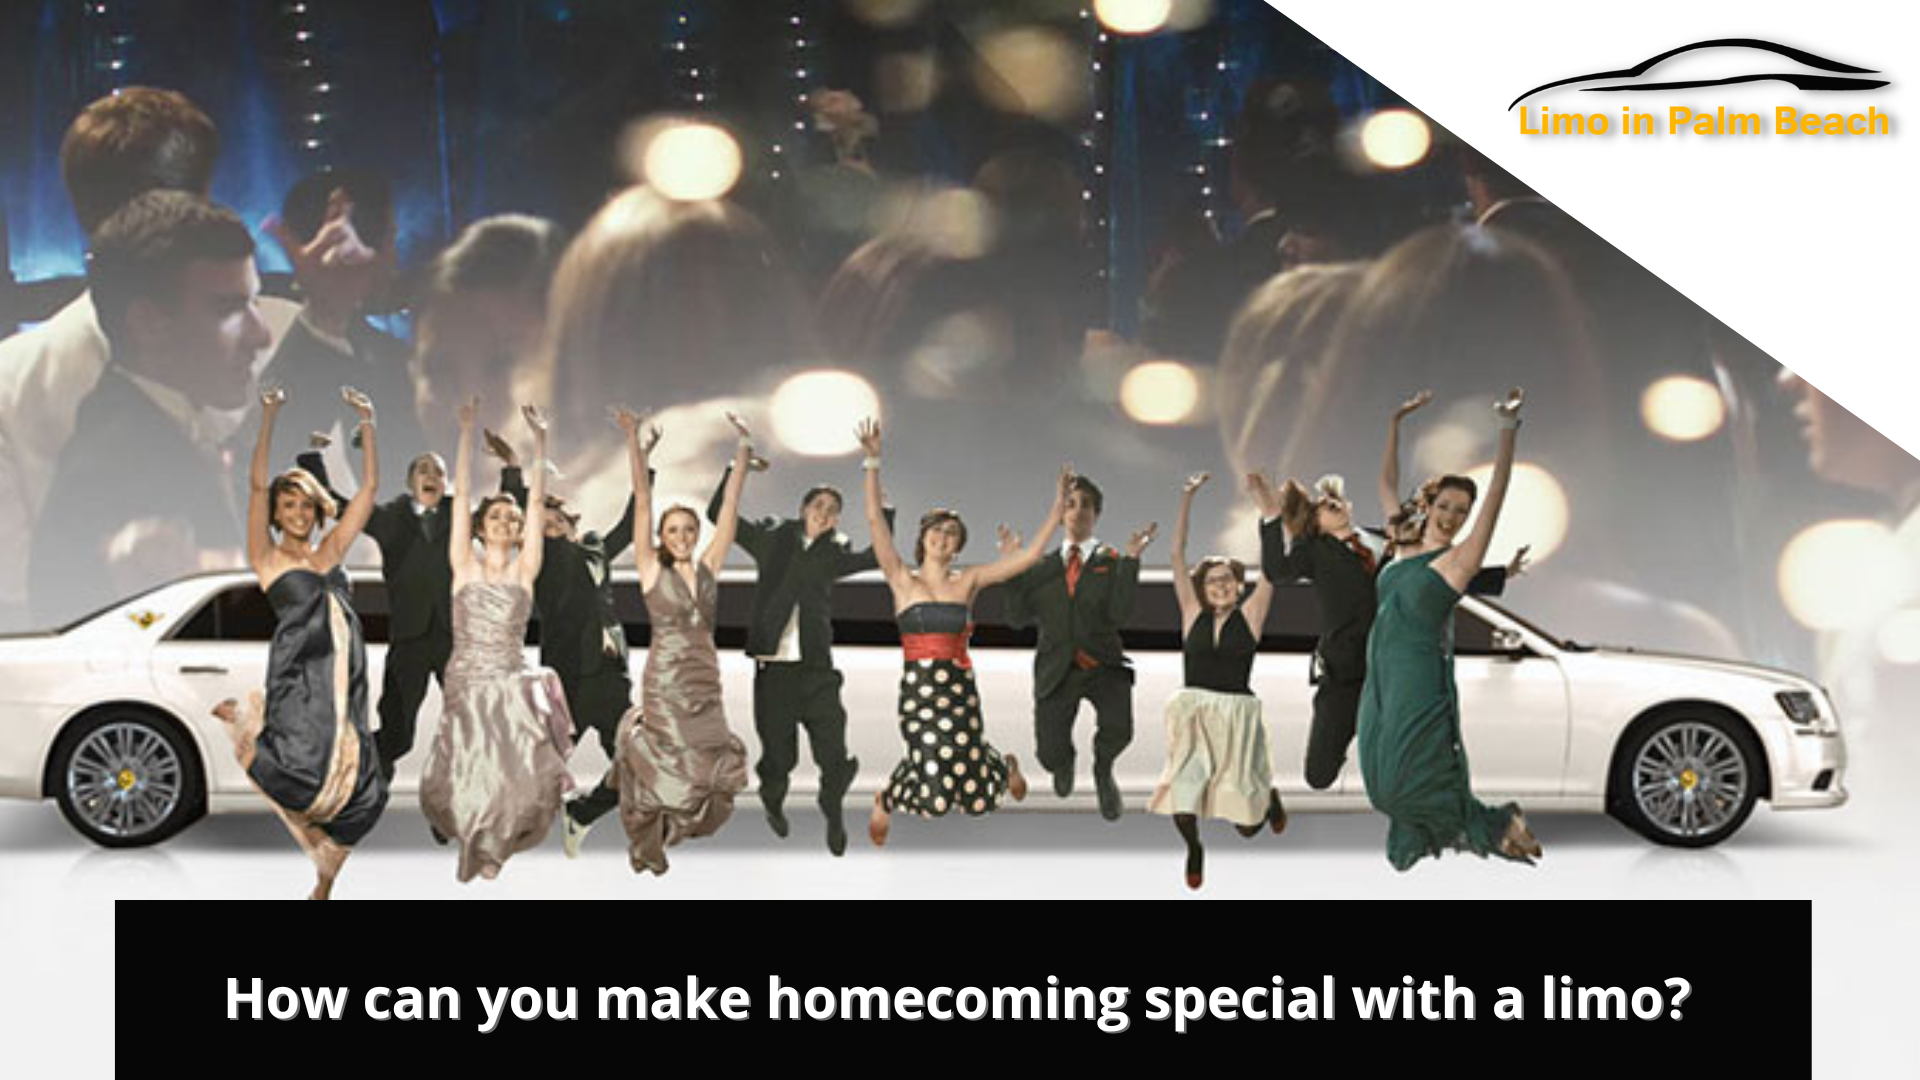 How can you make homecoming special with a limo?